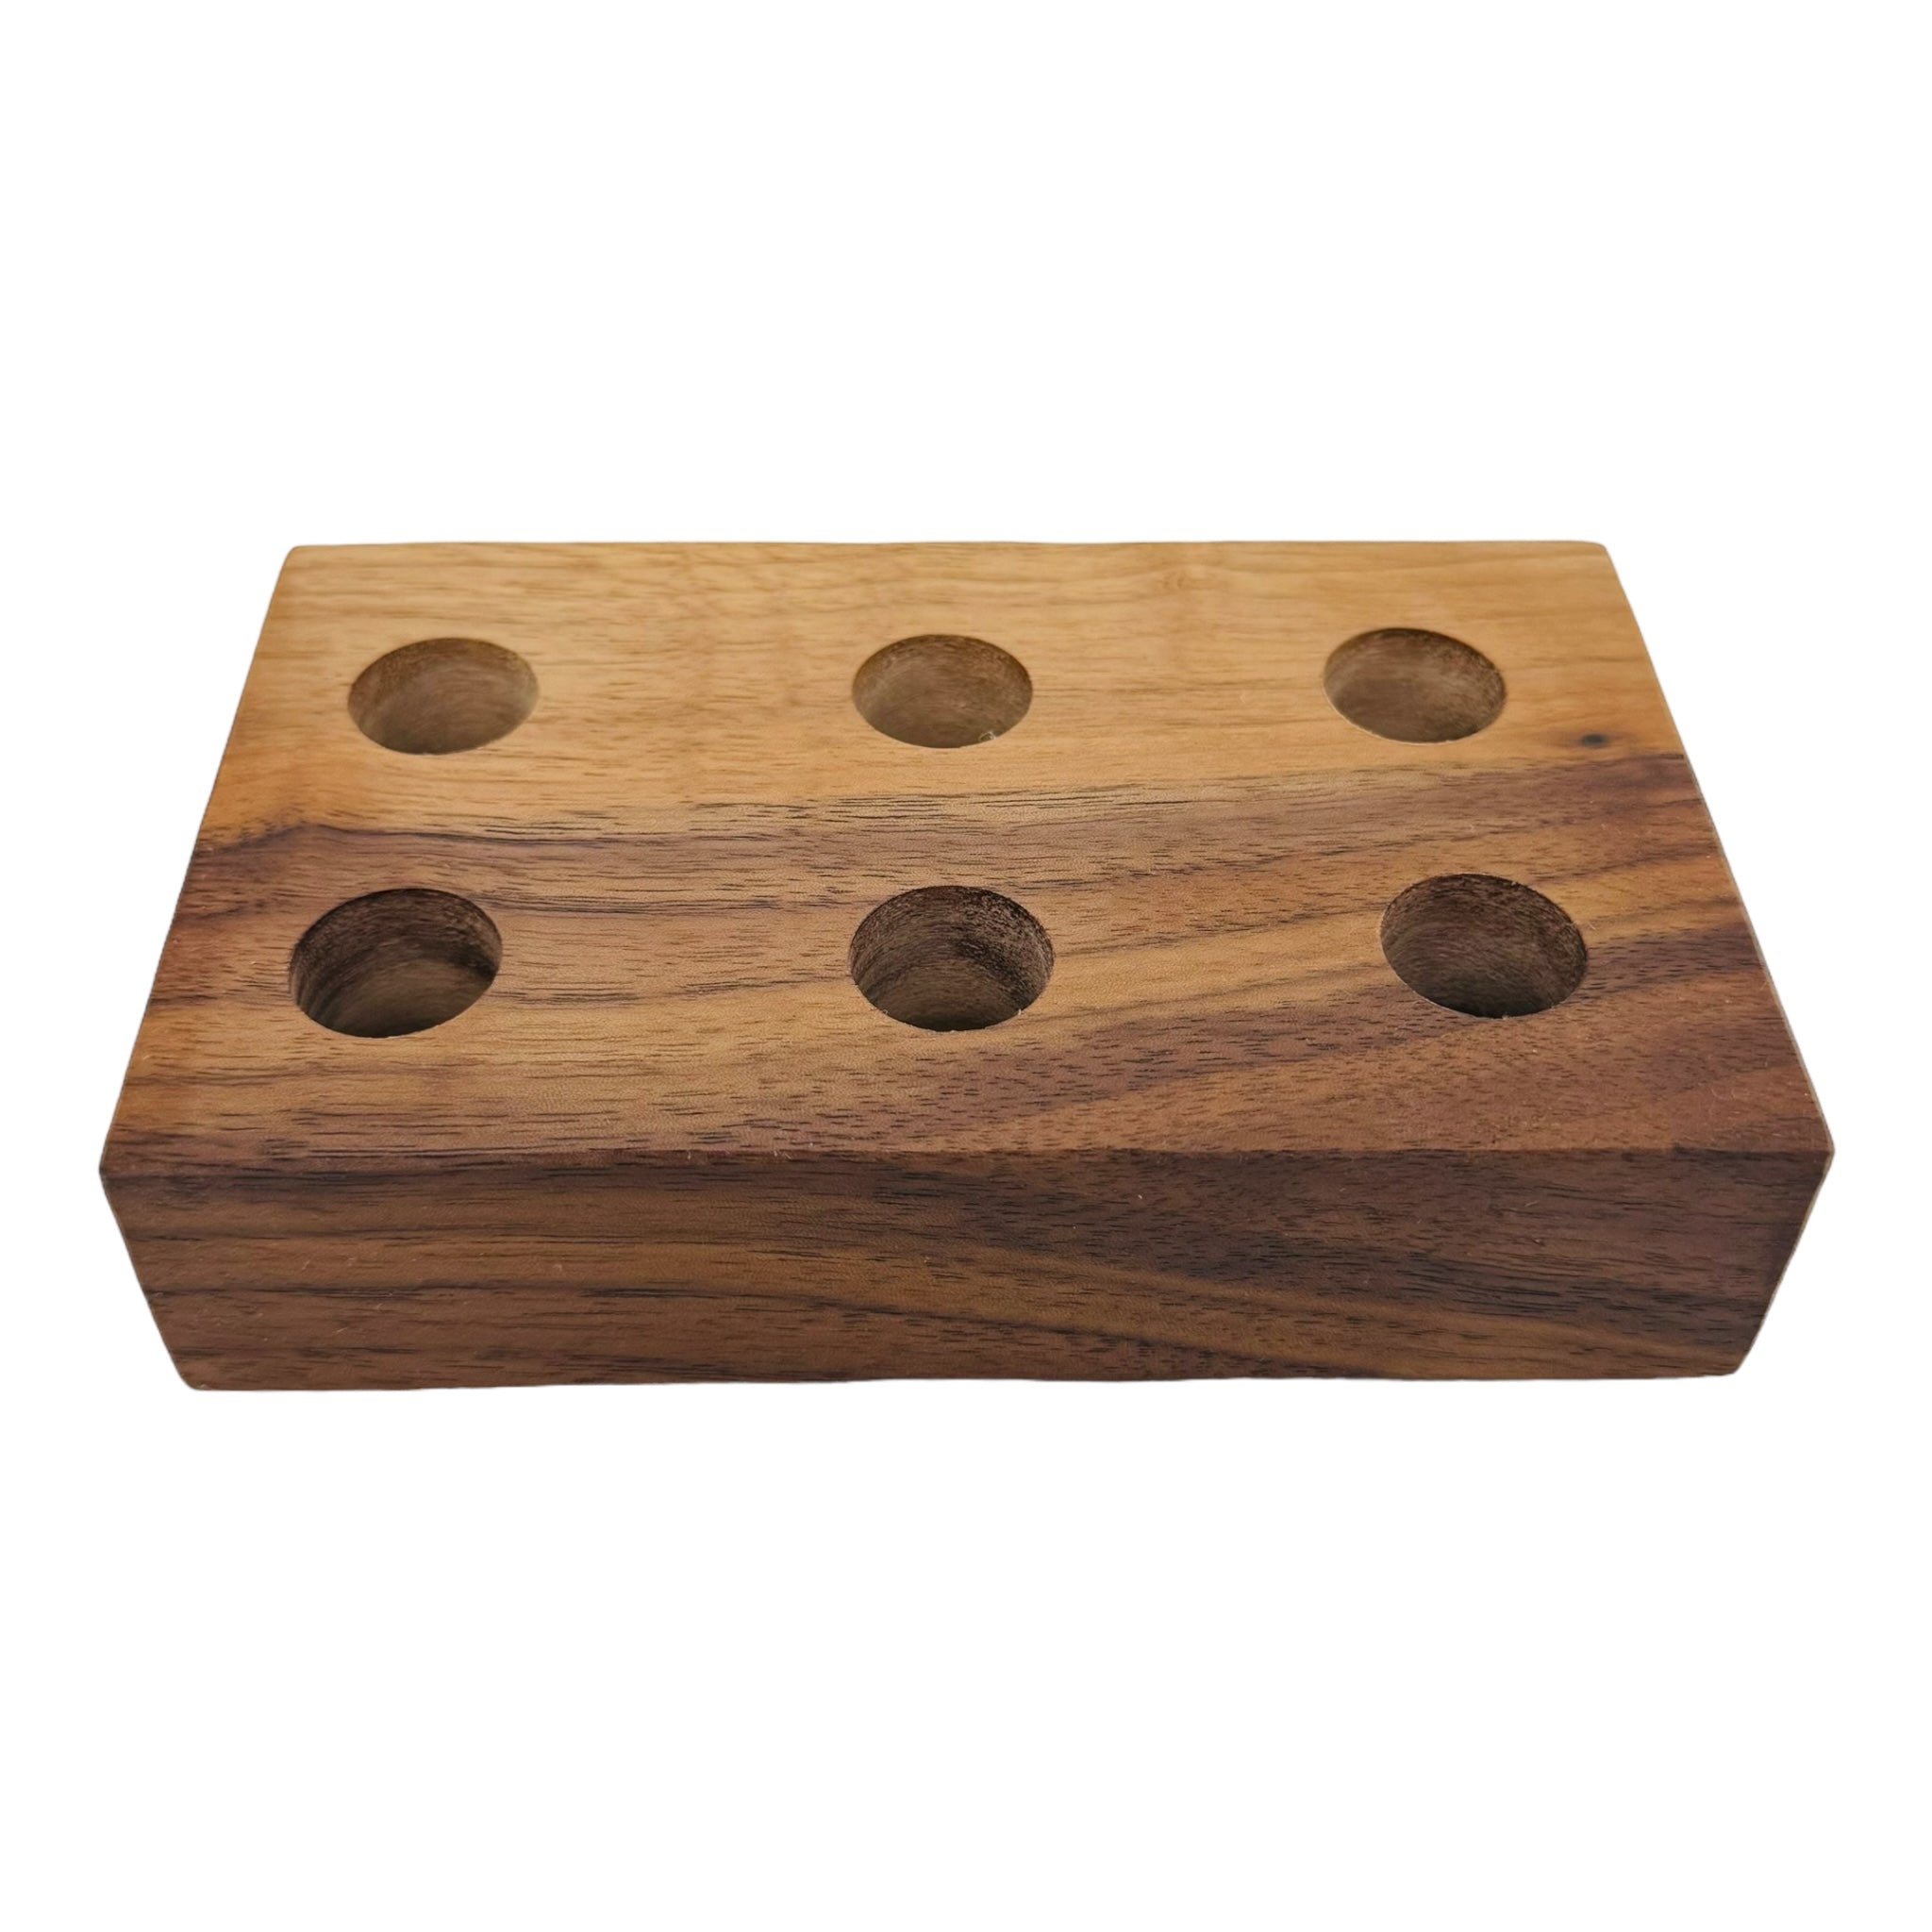 6 Hole Wood Display Stand Holder For 18mm Bong Bowl Pieces Or Quartz Bangers - Black Walnut